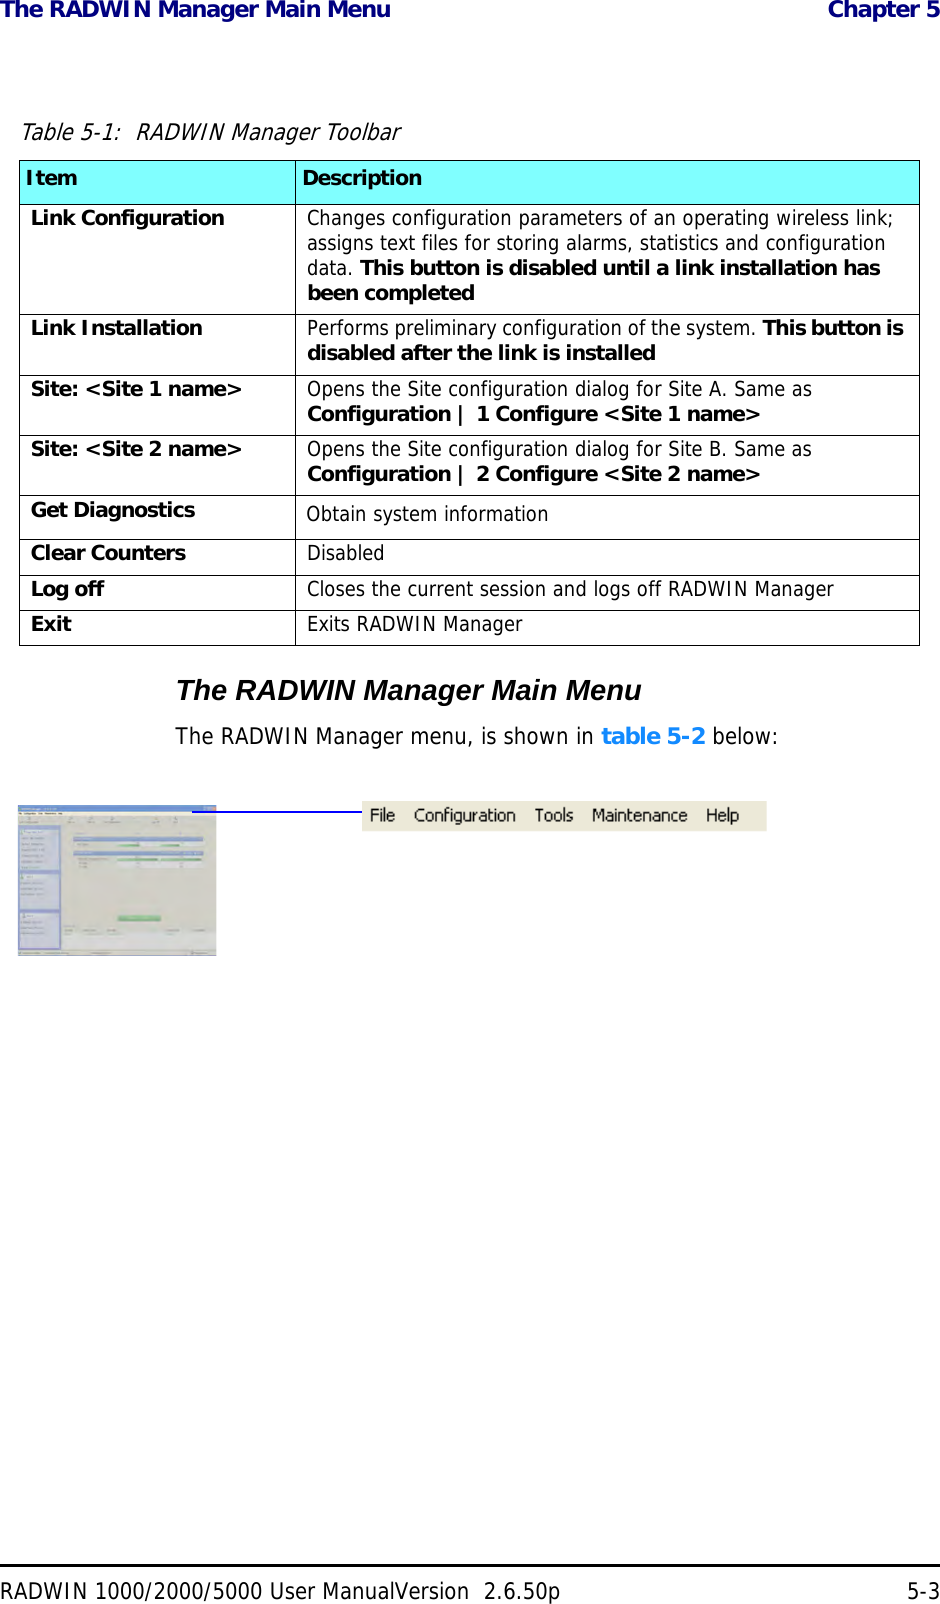 The RADWIN Manager Main Menu  Chapter 5RADWIN 1000/2000/5000 User ManualVersion  2.6.50p 5-3The RADWIN Manager Main MenuThe RADWIN Manager menu, is shown in table 5-2 below:Table 5-1:  RADWIN Manager ToolbarItem DescriptionLink Configuration Changes configuration parameters of an operating wireless link; assigns text files for storing alarms, statistics and configuration data. This button is disabled until a link installation has been completedLink Installation Performs preliminary configuration of the system. This button is disabled after the link is installedSite: &lt;Site 1 name&gt; Opens the Site configuration dialog for Site A. Same as Configuration | 1 Configure &lt;Site 1 name&gt;Site: &lt;Site 2 name&gt; Opens the Site configuration dialog for Site B. Same as Configuration | 2 Configure &lt;Site 2 name&gt;Get Diagnostics Obtain system informationClear Counters DisabledLog off Closes the current session and logs off RADWIN ManagerExit Exits RADWIN Manager